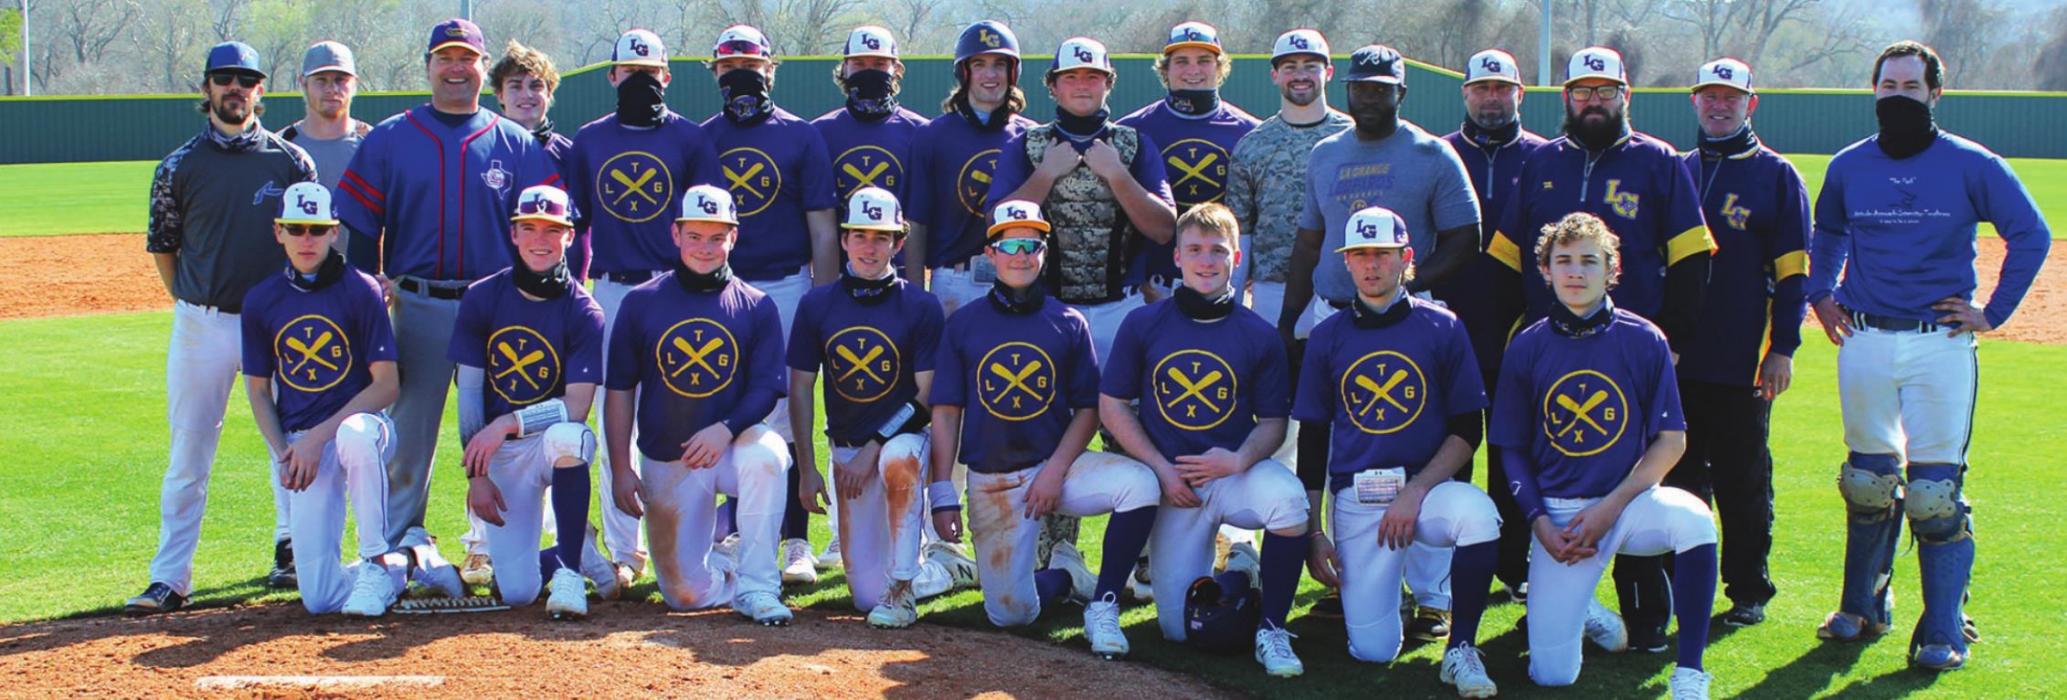 The members of the La Grange baseball team pose with the members of the alumni squad after Saturday’s scrimmage. Photo by Jeff Wick